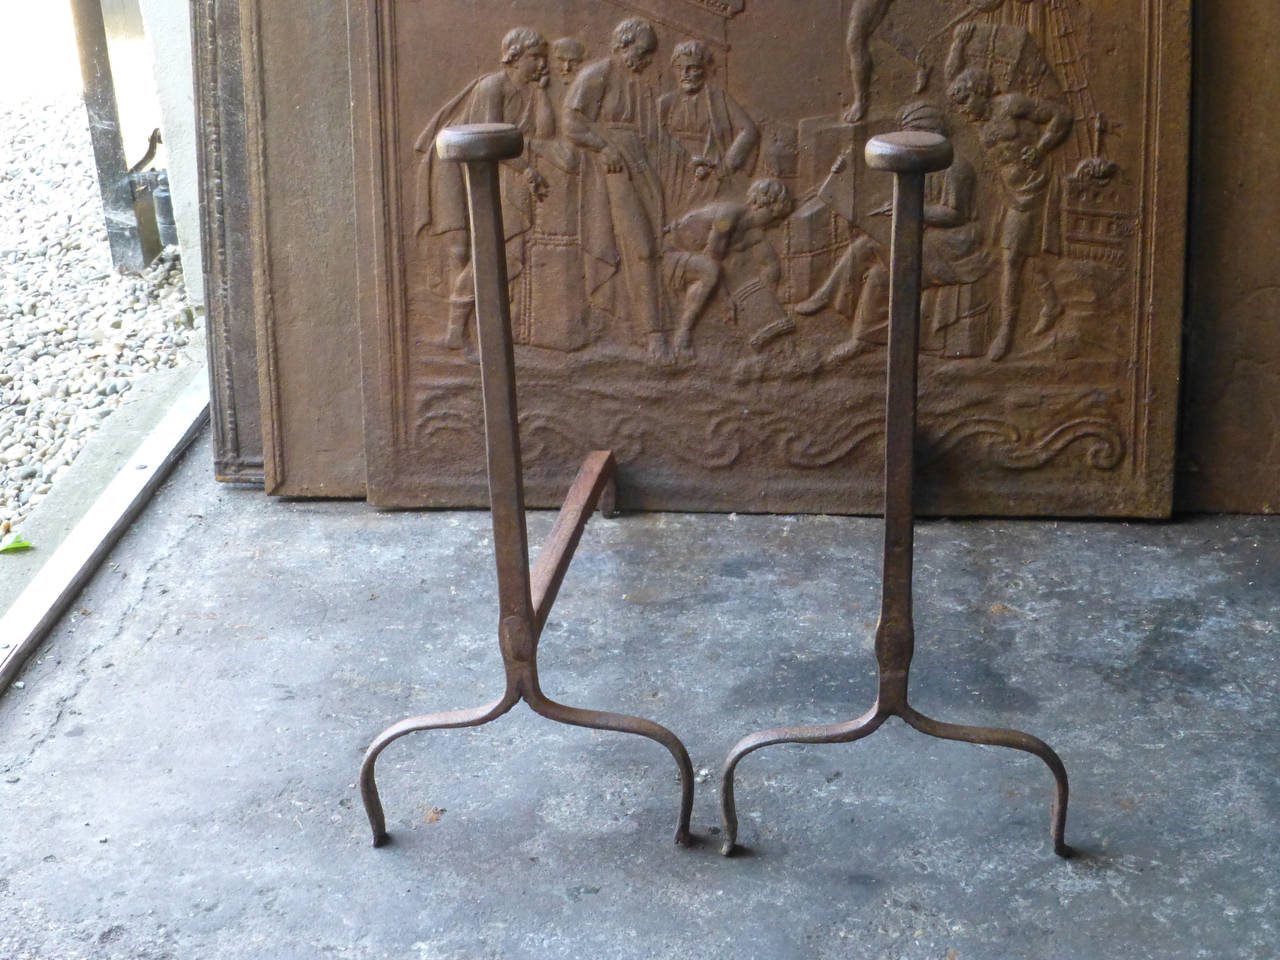 Large 18th Century French Andirons, Firedogs. Louis XV period. The condition is good.